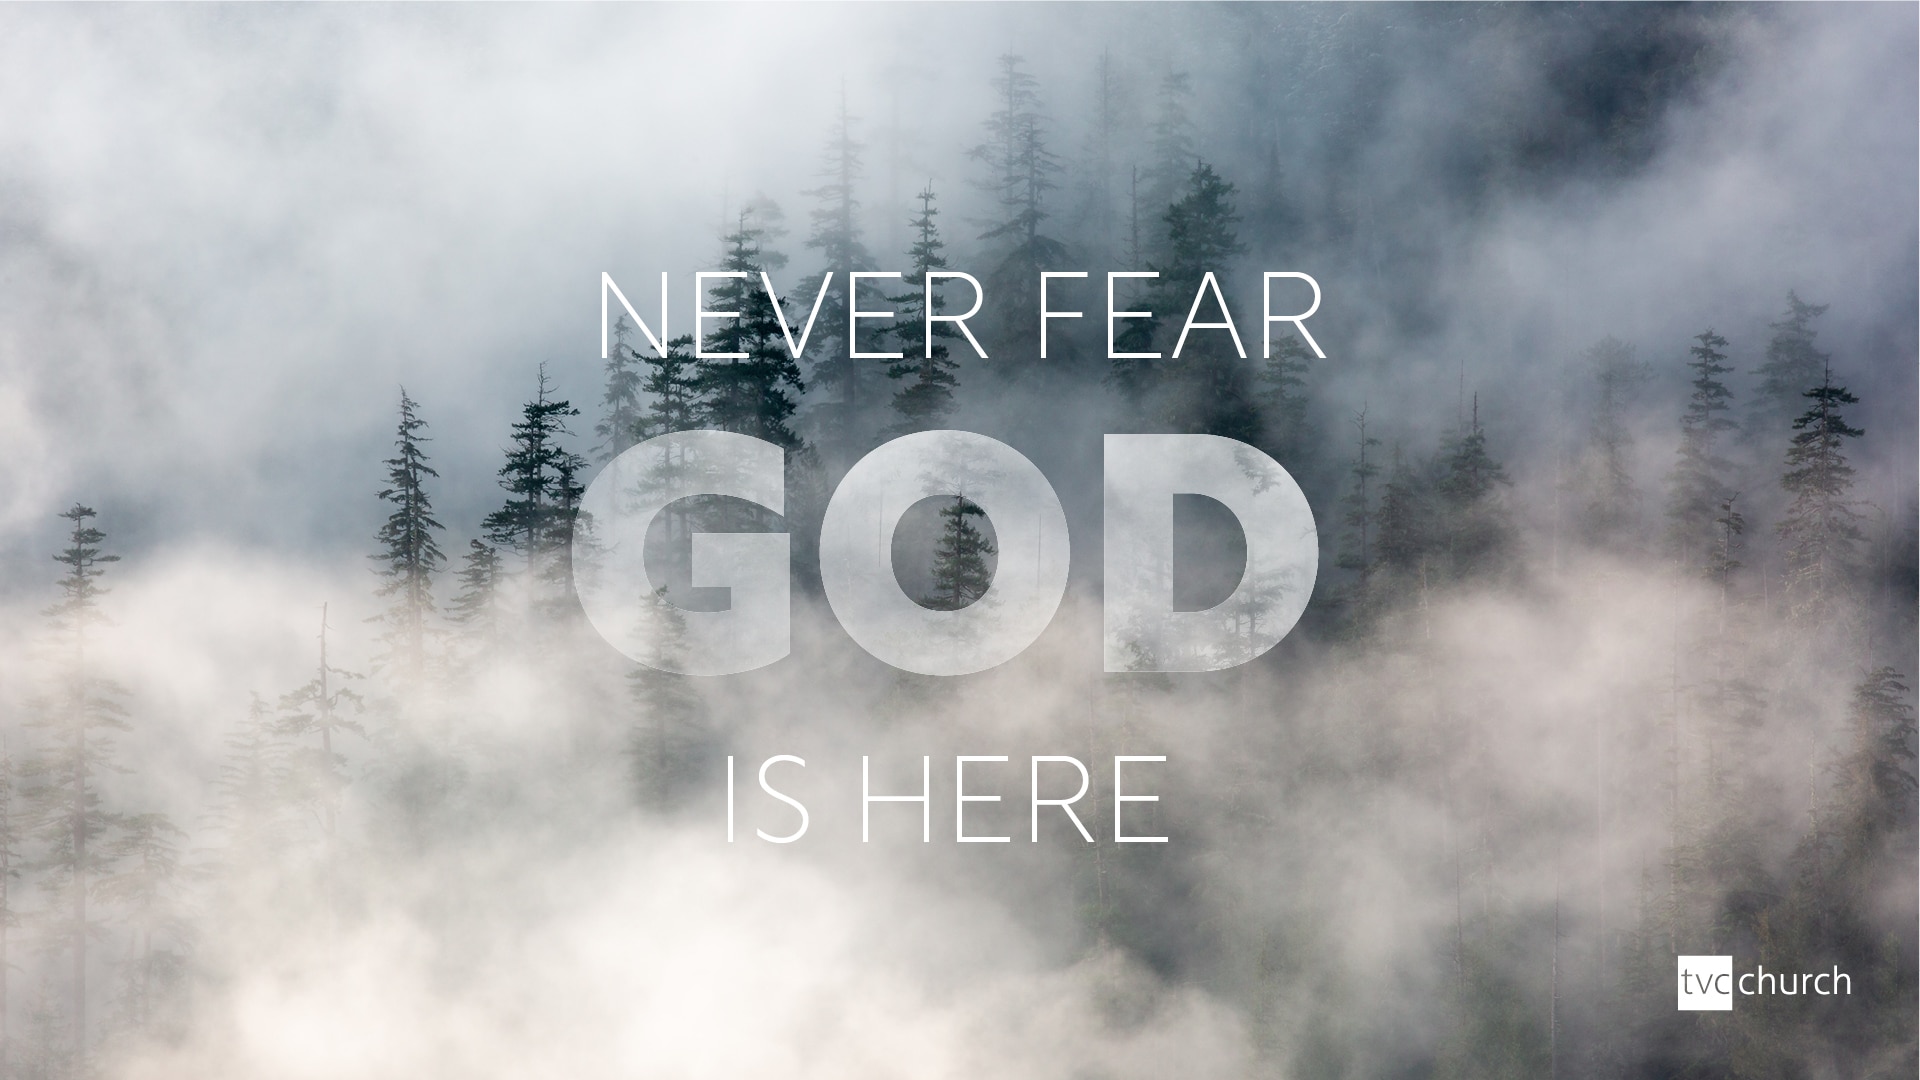 Never fear – God is here